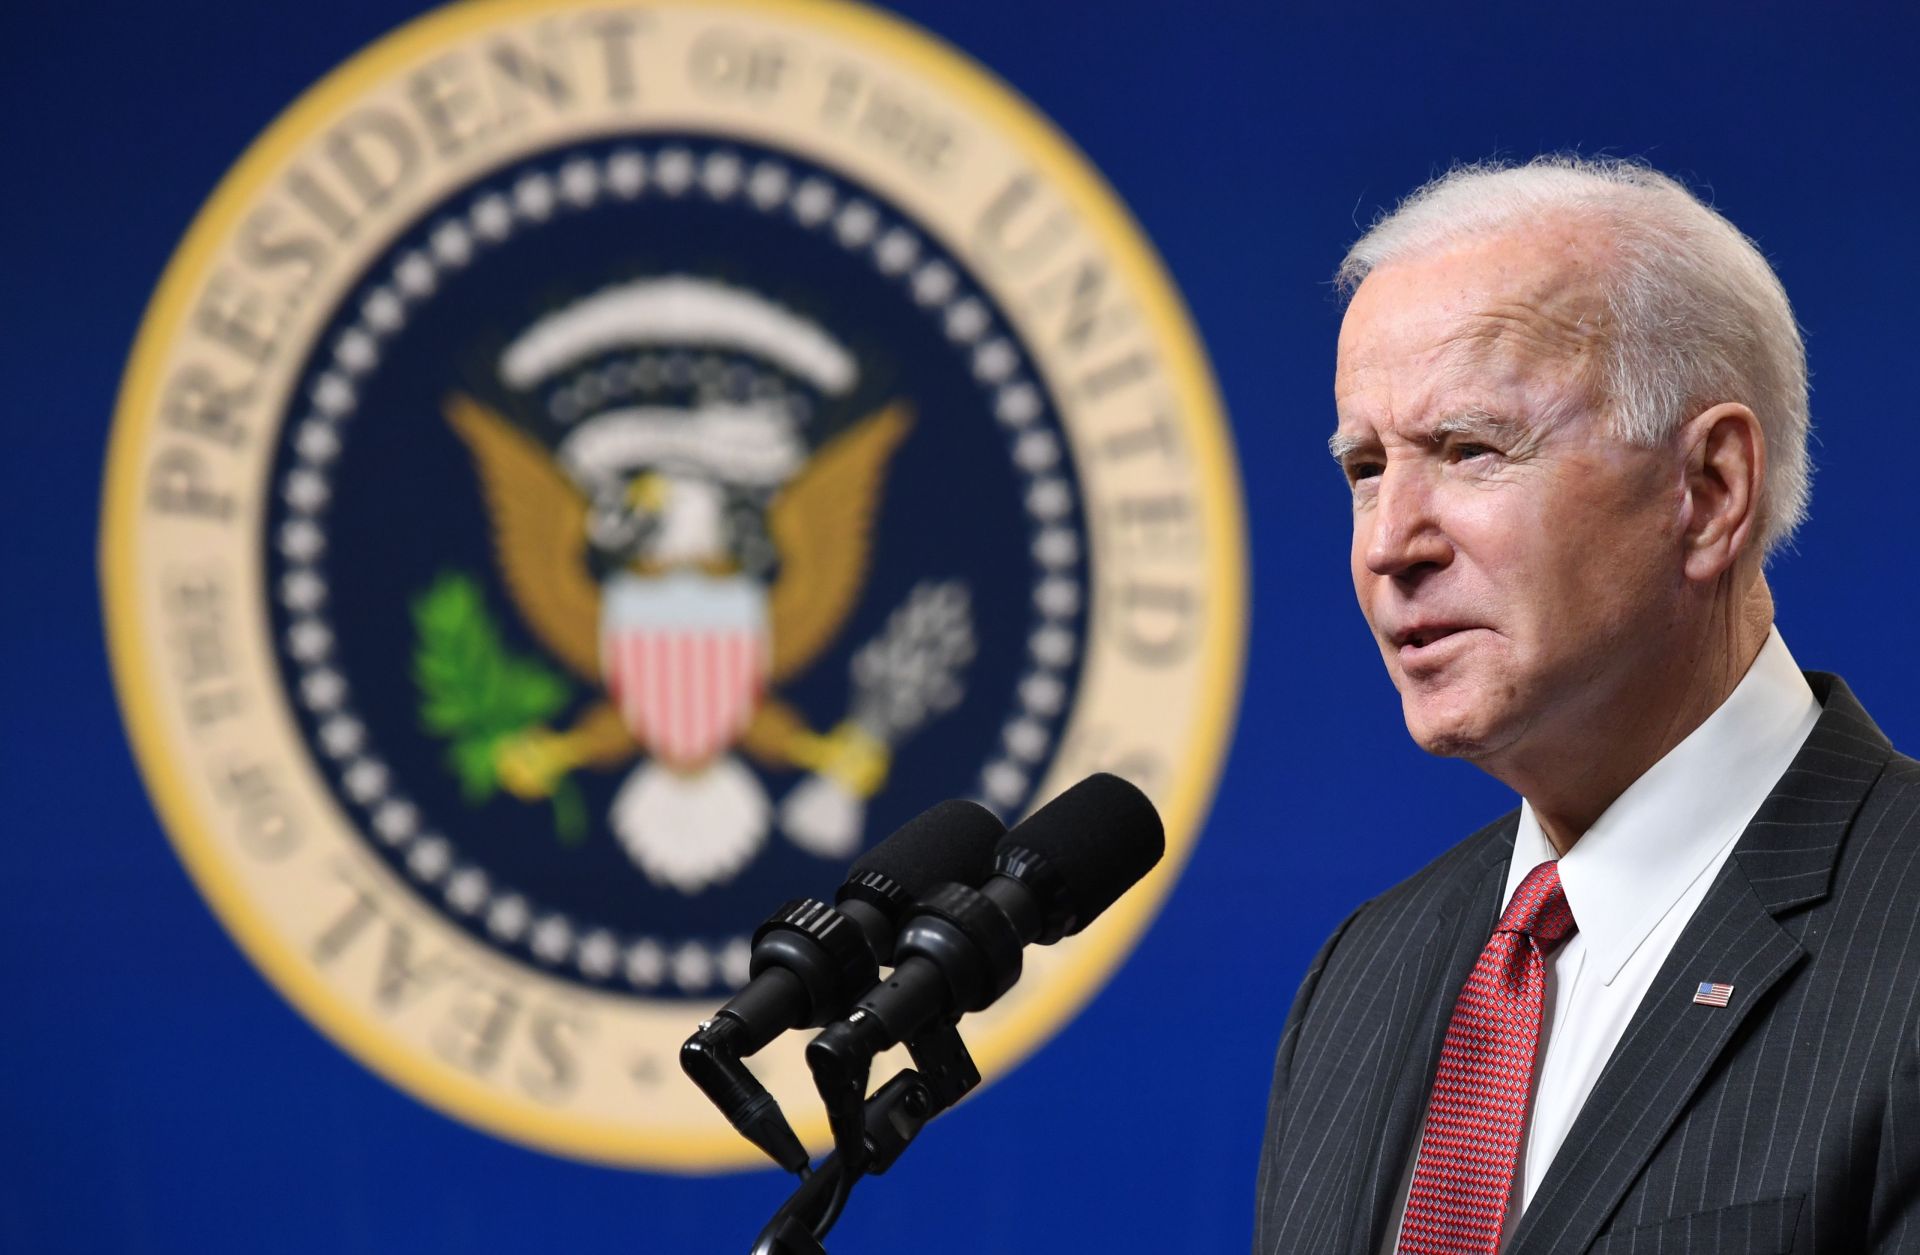 U.S. President Joe Biden speaks about the situation in Myanmar following the recent military coup in Washington D.C. on Feb. 10, 2021. 